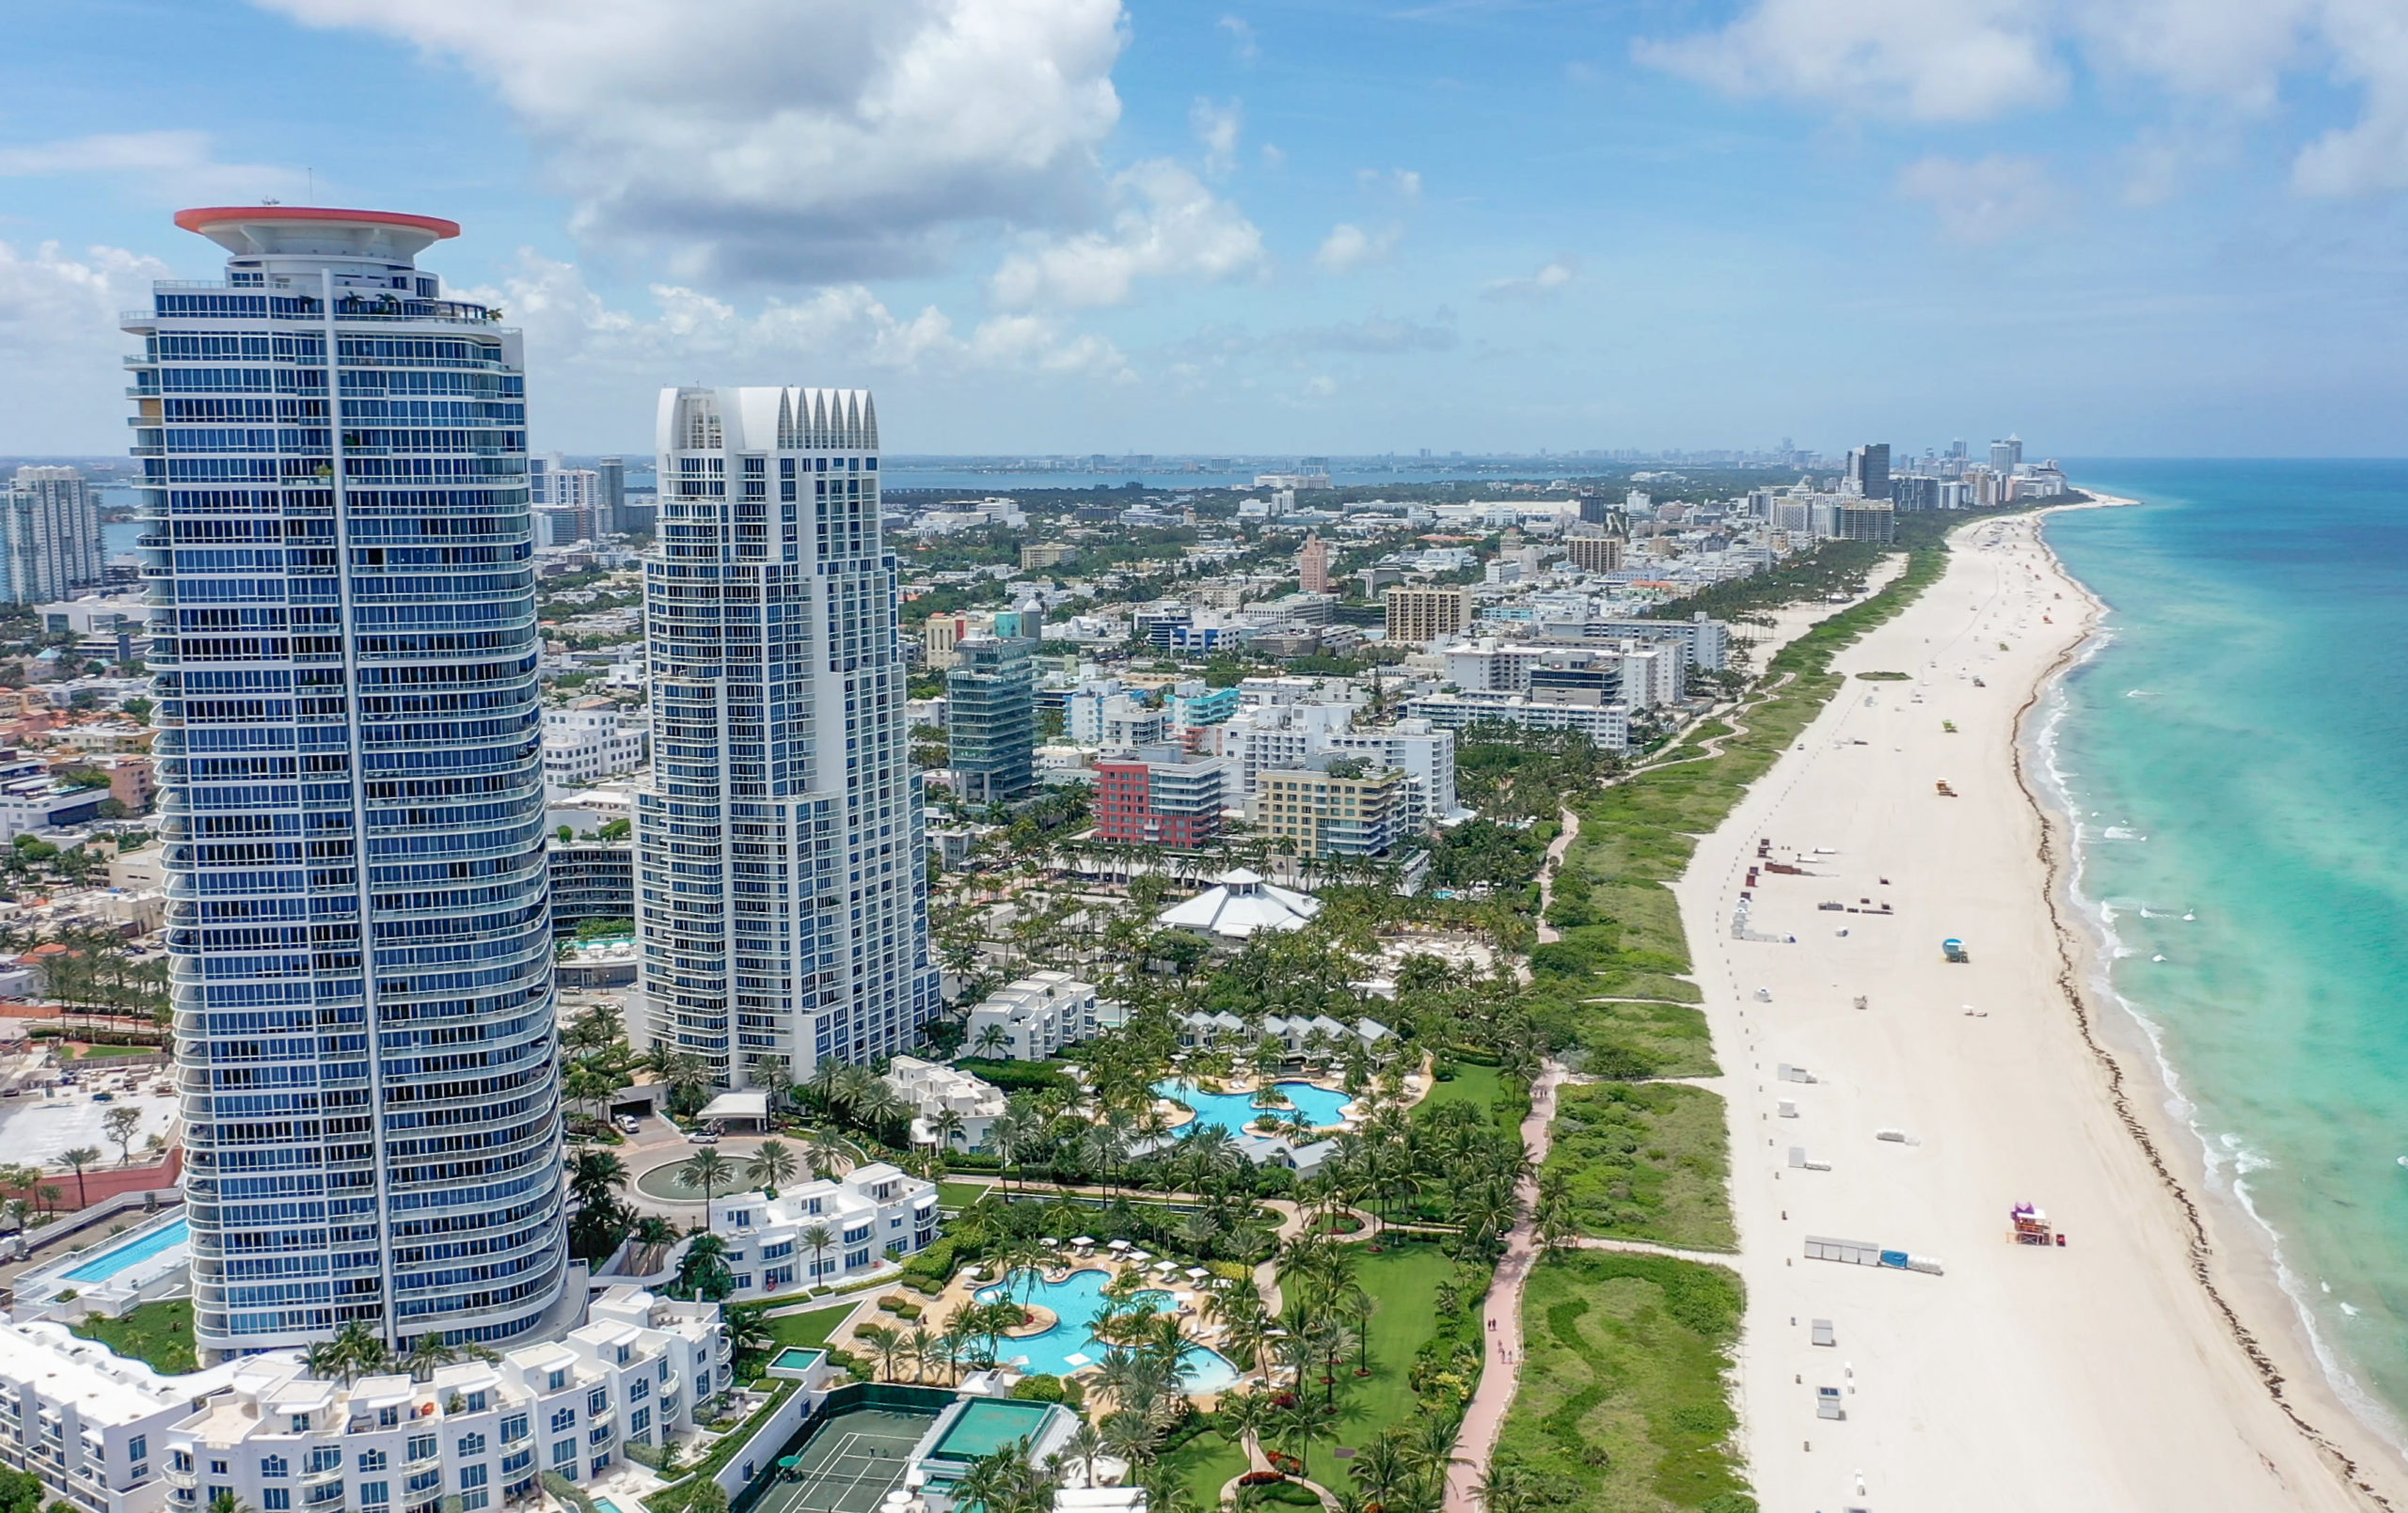 Continuum Miami Beach Units for Sale | The Best Continuum Unit for Sale in September 2019